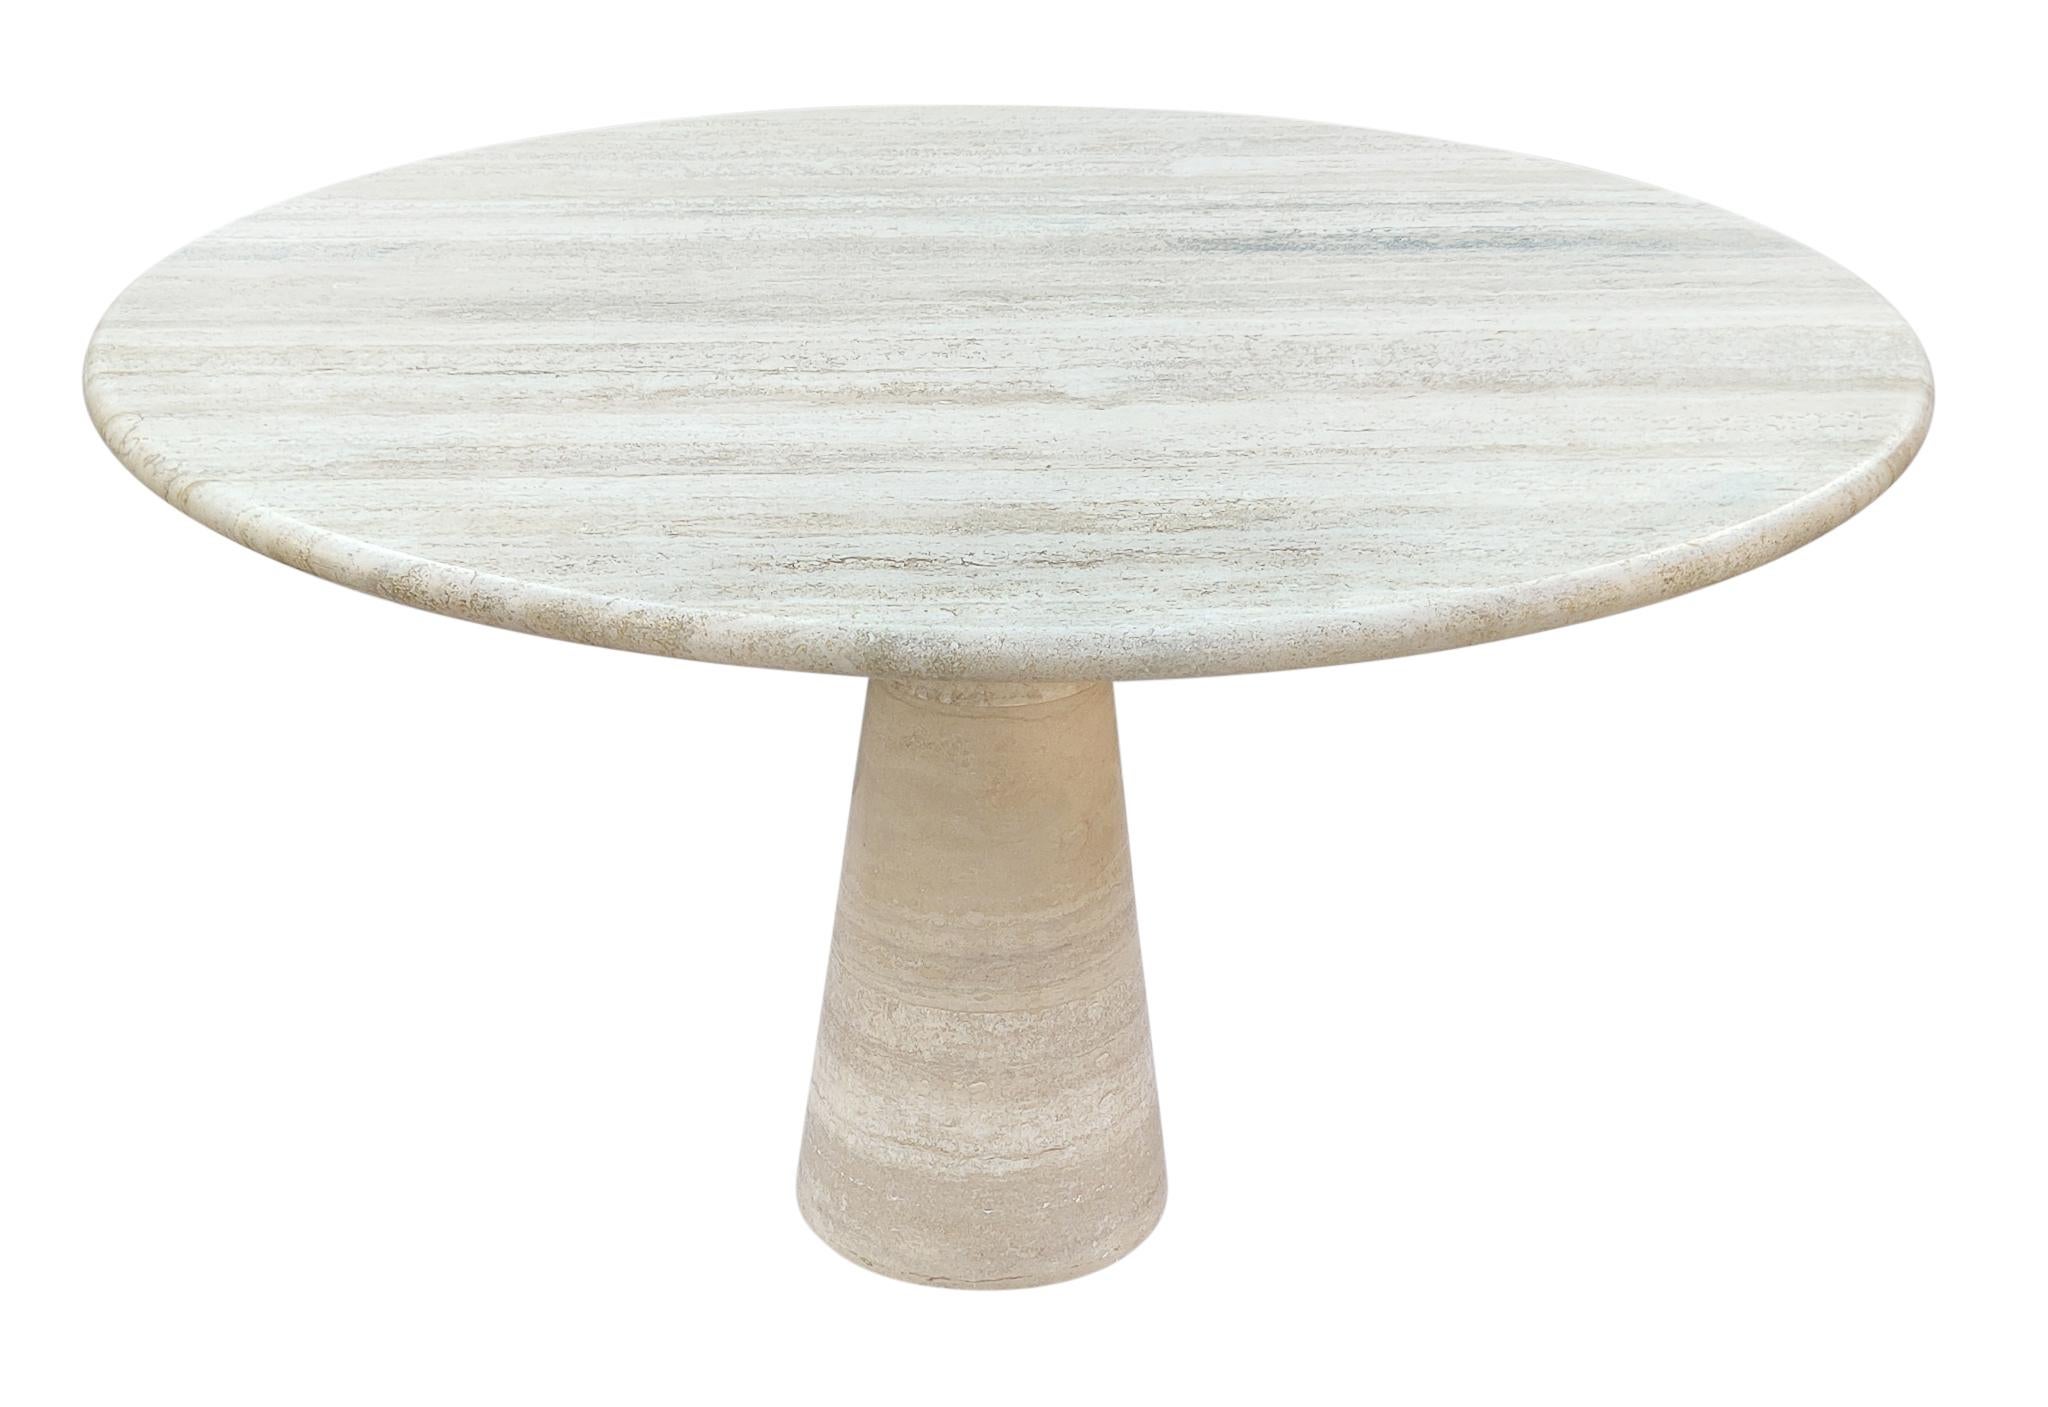 Mid-Century Modern Angelo Mangiarotti Attributed Round Travertine Pedestal Dining Table For Sale